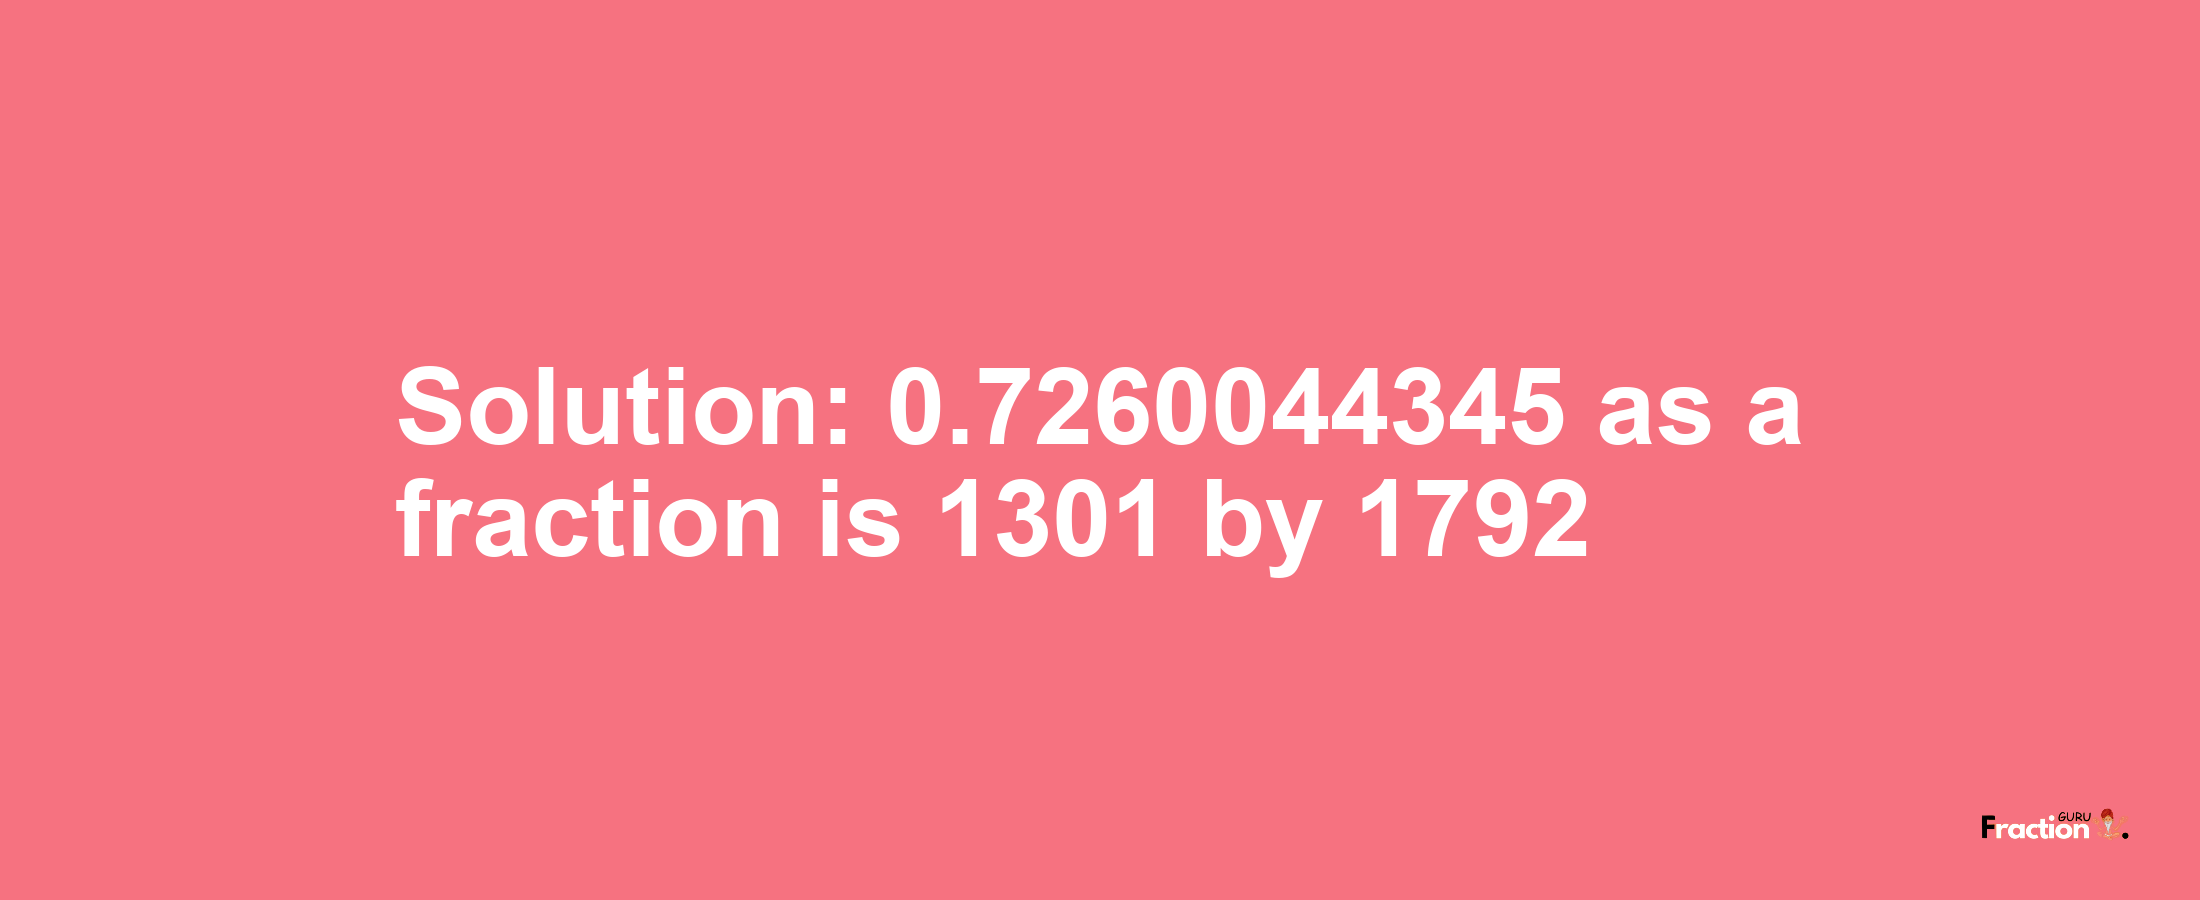 Solution:0.7260044345 as a fraction is 1301/1792